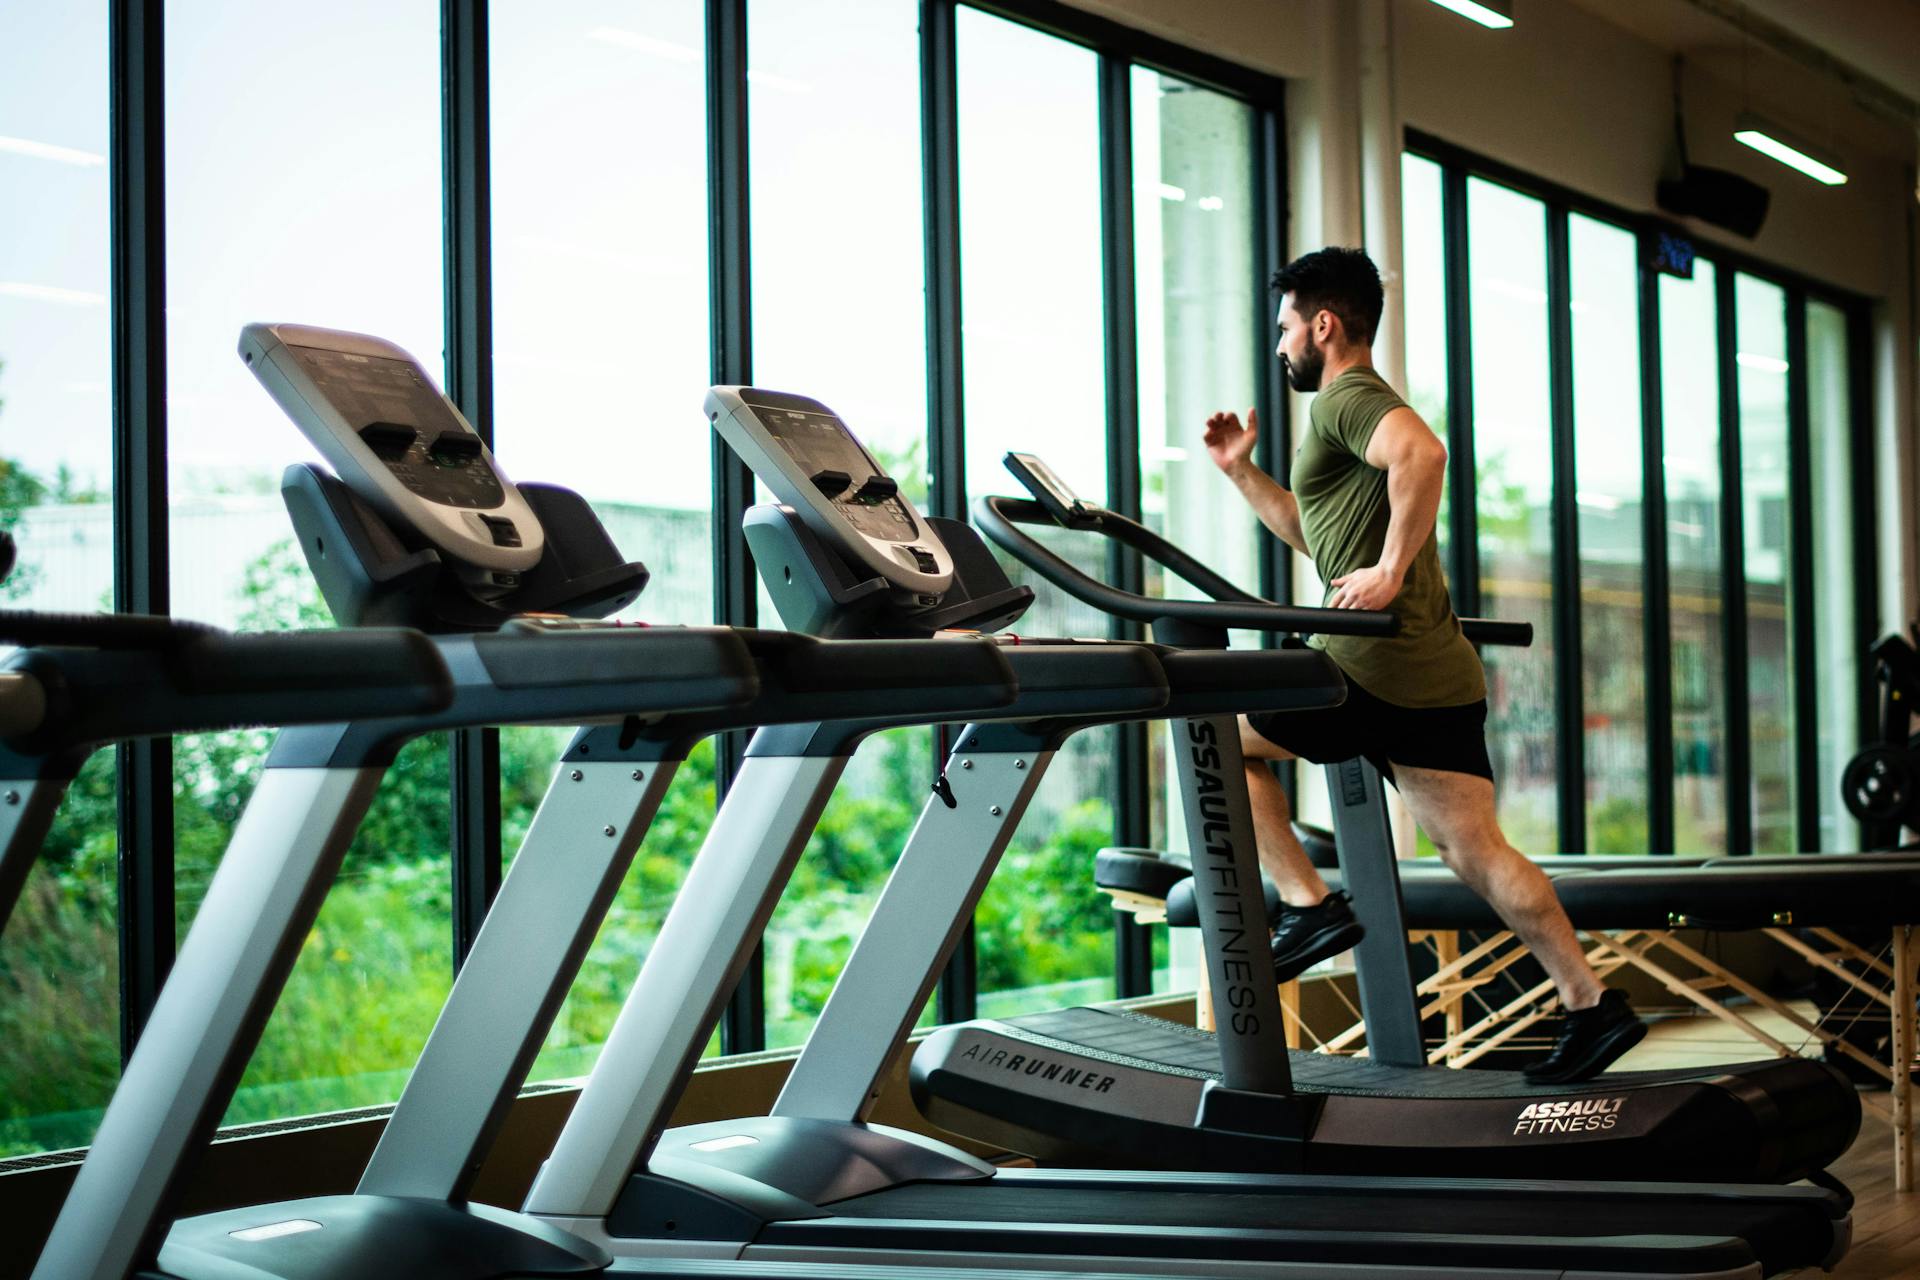 A man running on a treadmill in a gym | Source: Pexels